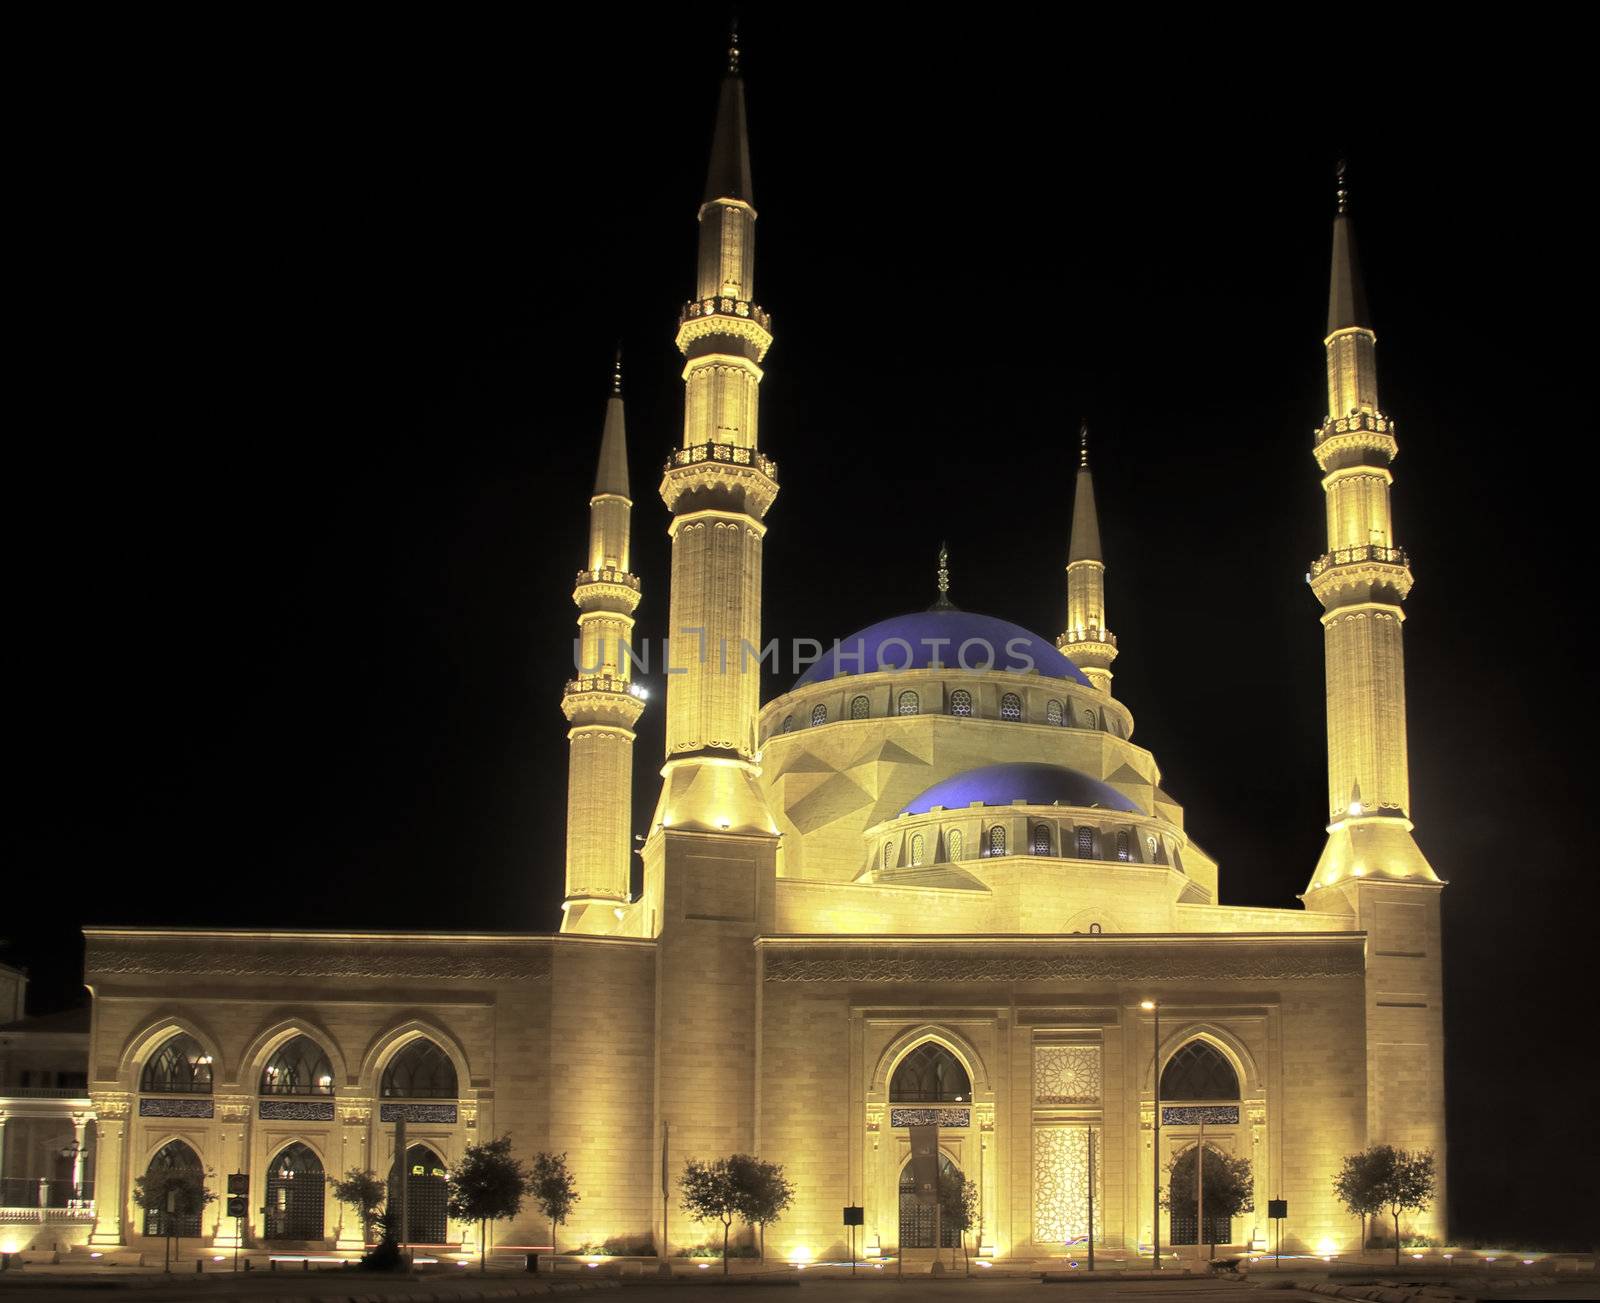 Floodlit Blue Mosque in Beirut by steheap